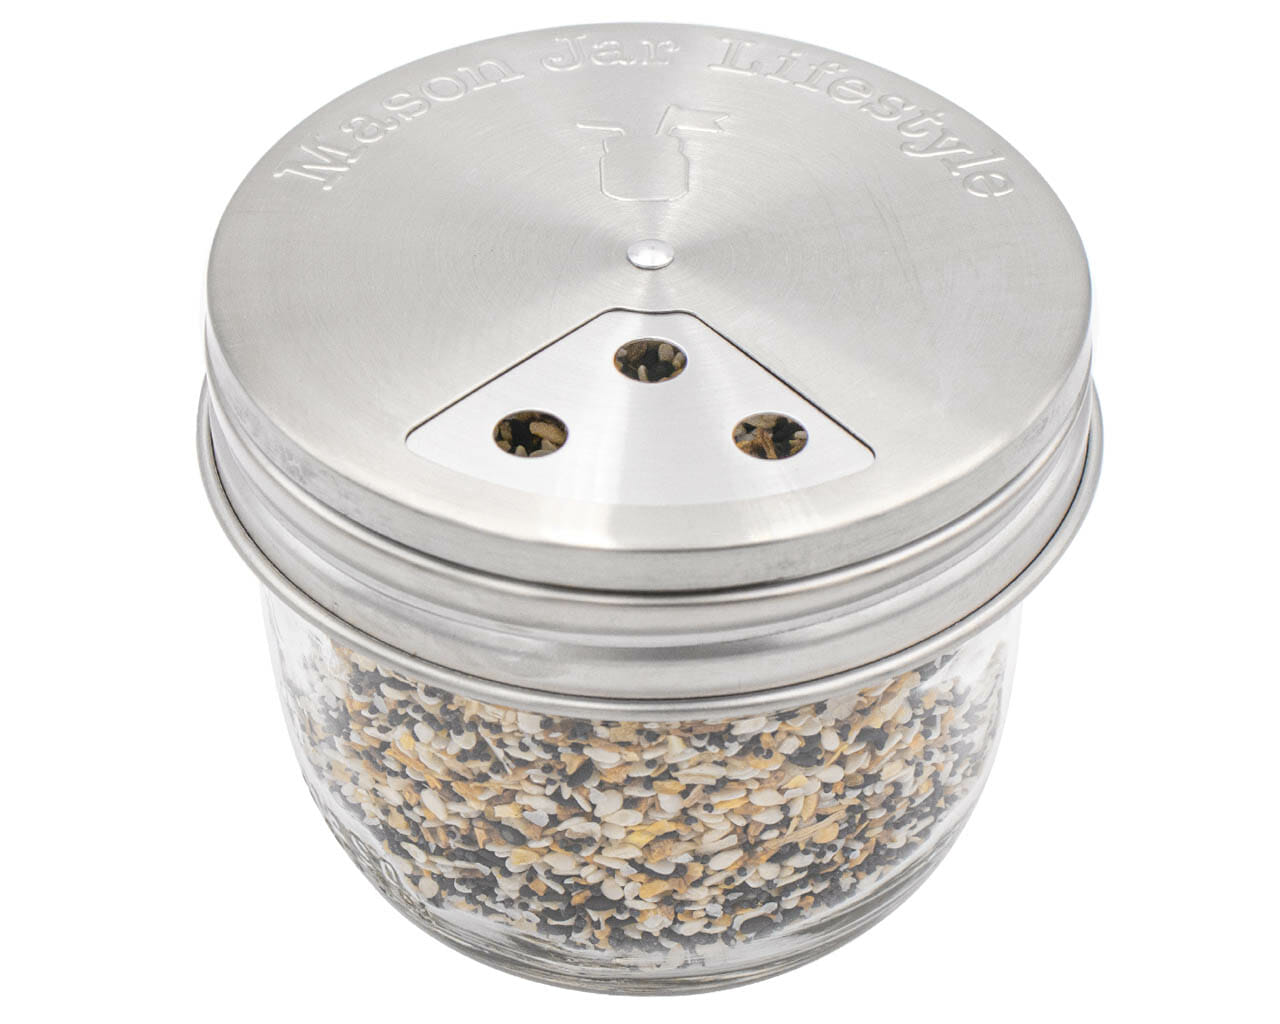 https://masonjarlifestyle.com/cdn/shop/files/mason-jar-lifestyle-wide-mouth-stainless-steel-spice-shaker-lid-large-three-hole-seed-mix.jpg?v=1695767585&width=1280